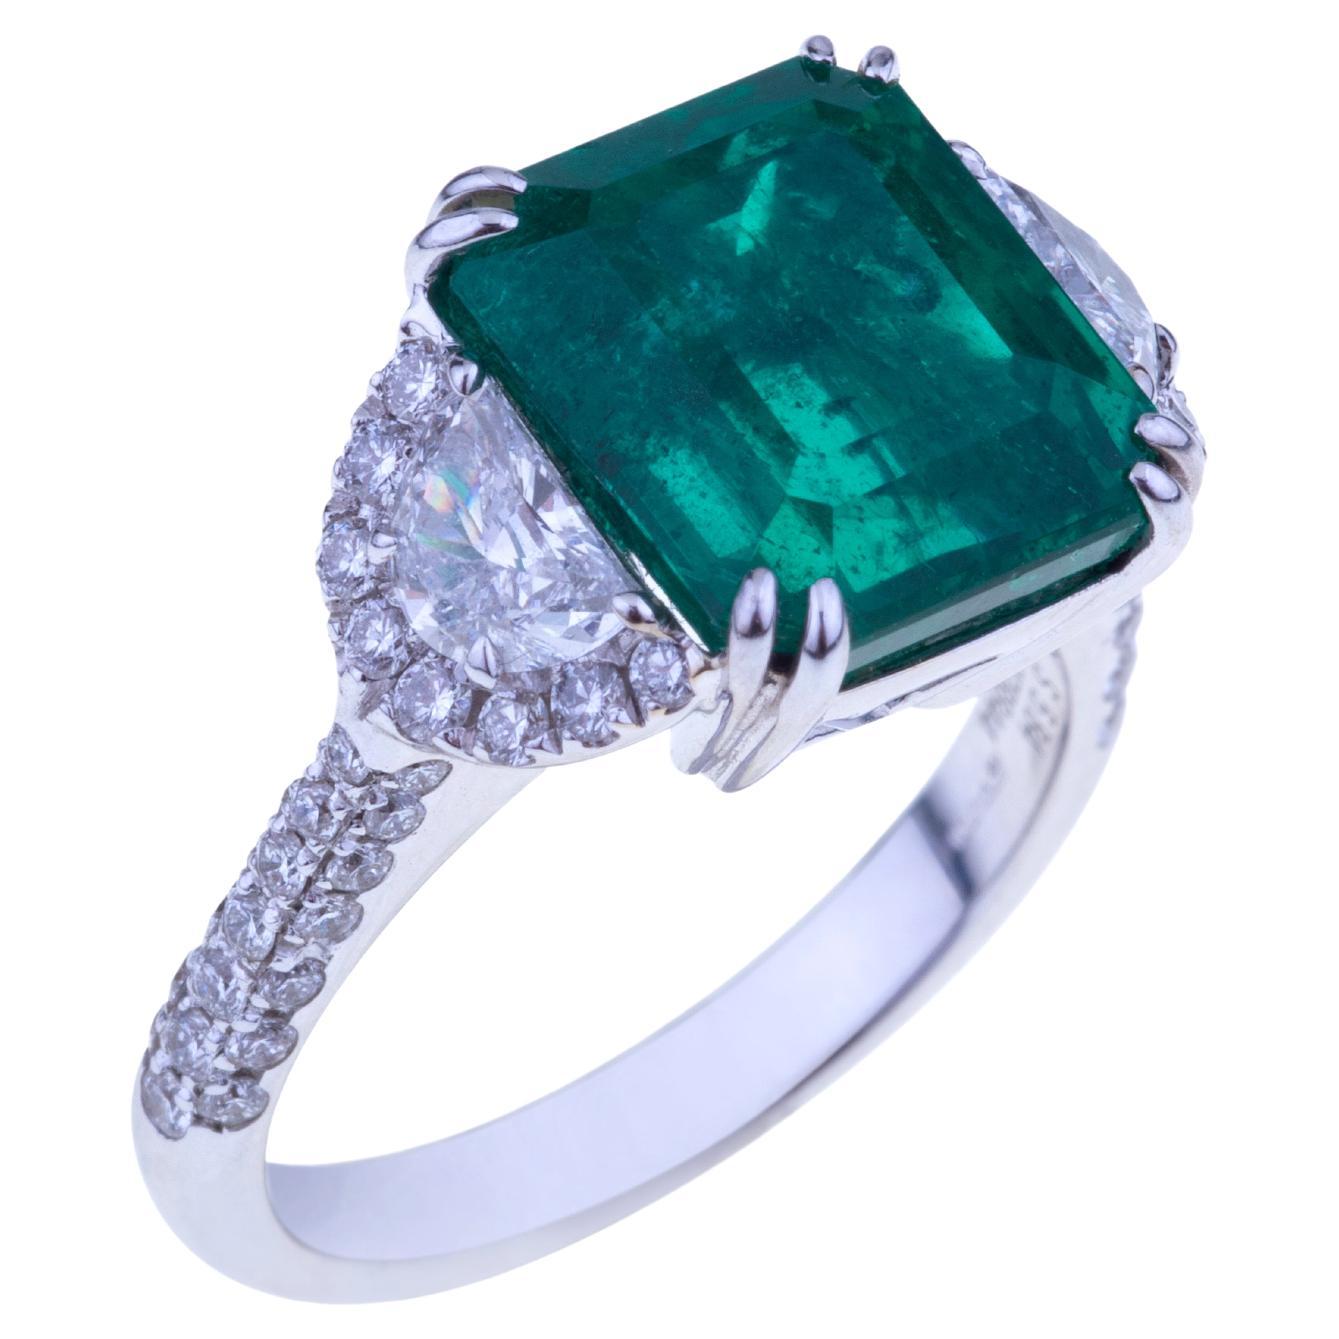 Stunning Emerald Ring ct. 5.84 with Diamonds. Unique stone.